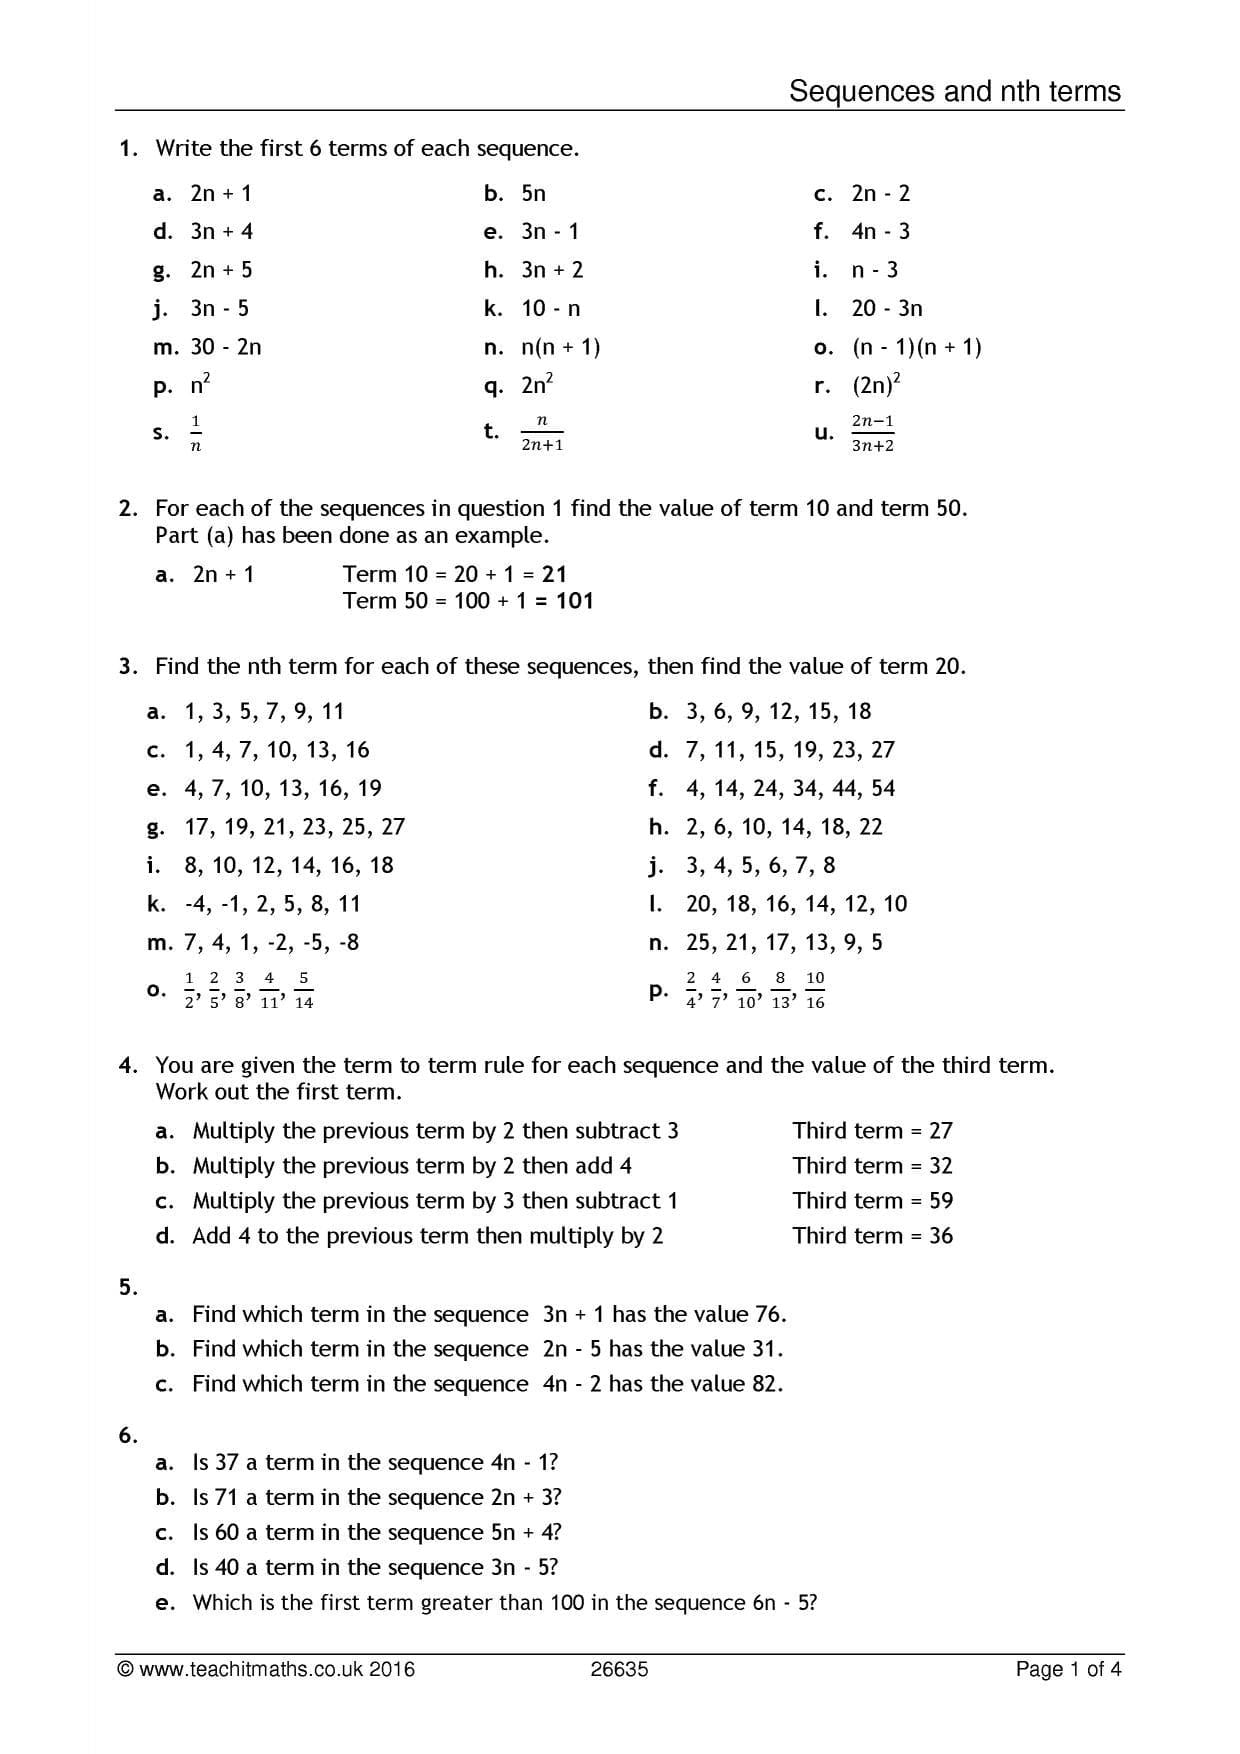 Sequences And Nth Terms Worksheet Pdf  Teachit Maths Along With Arithmetic And Geometric Sequences Worksheet Pdf